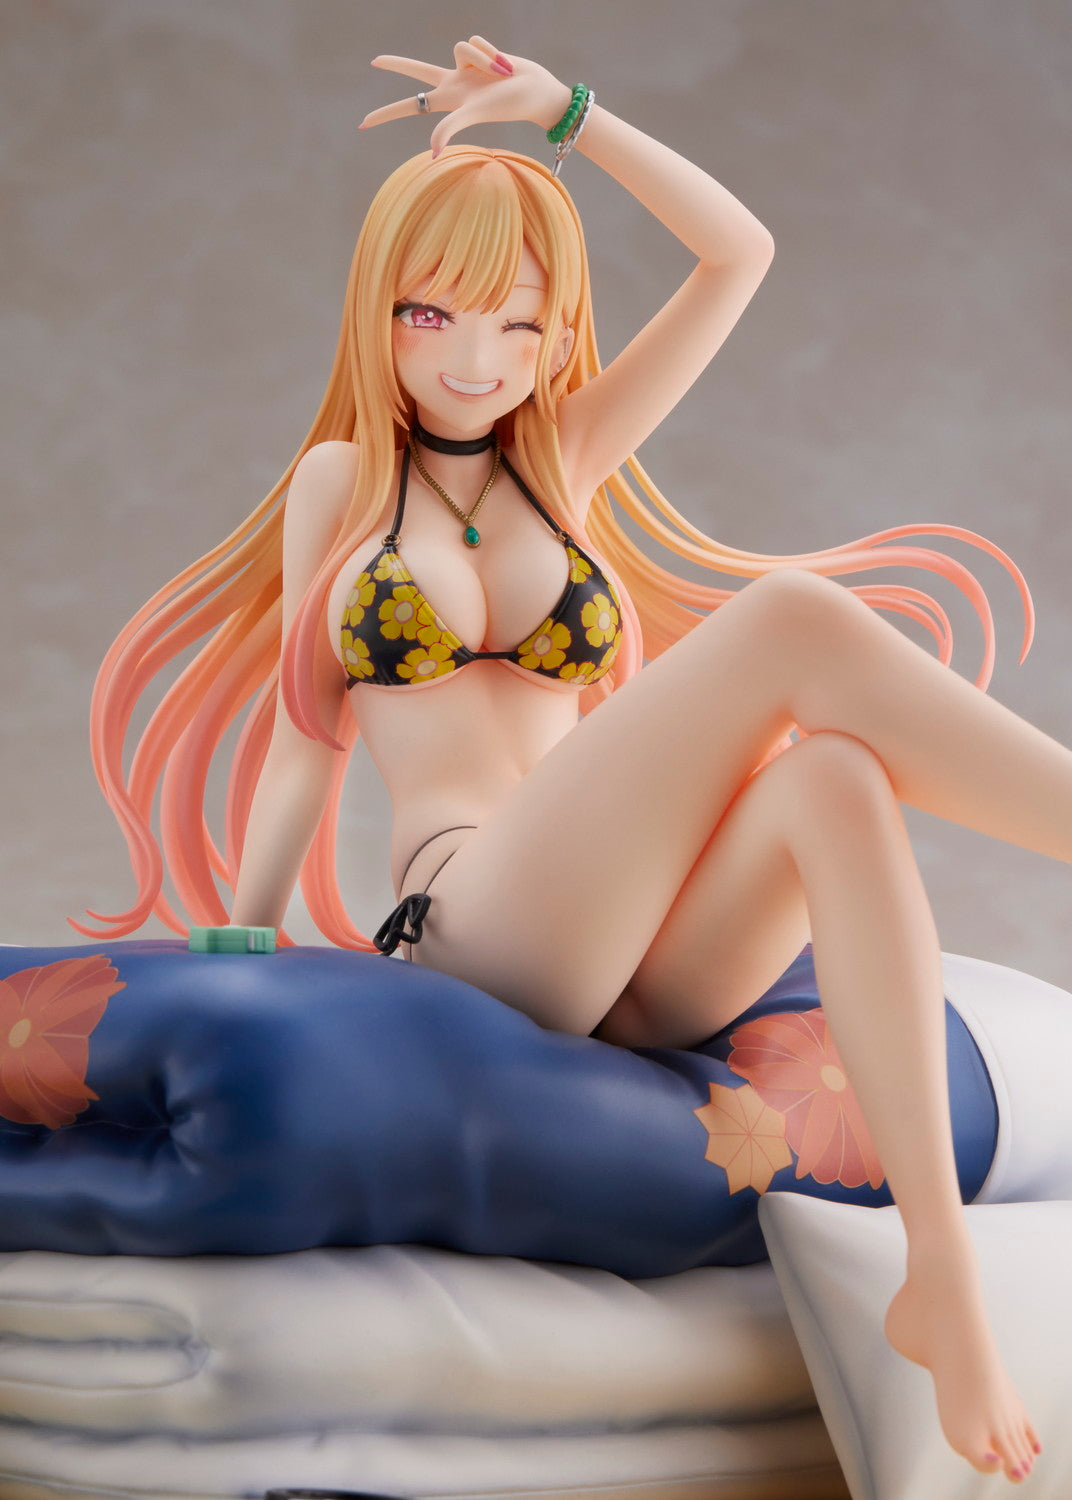 My Dress Up Darling - Marin Kitagawa 1/7 Scale Figure (Swimsuit Ver.) image count 6